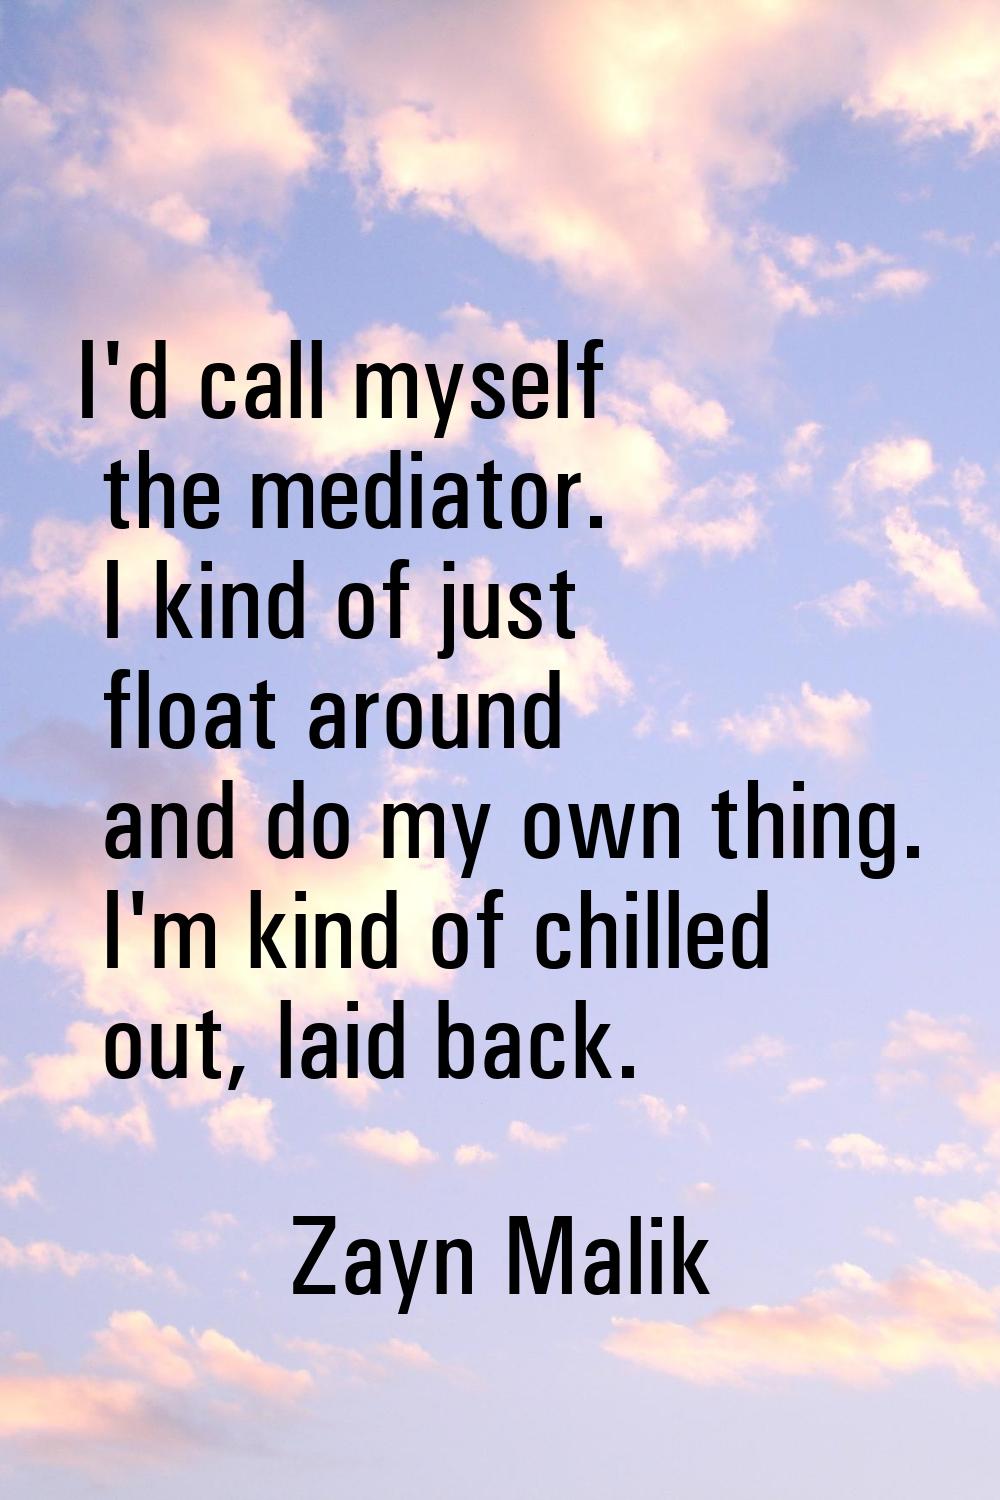 I'd call myself the mediator. I kind of just float around and do my own thing. I'm kind of chilled 